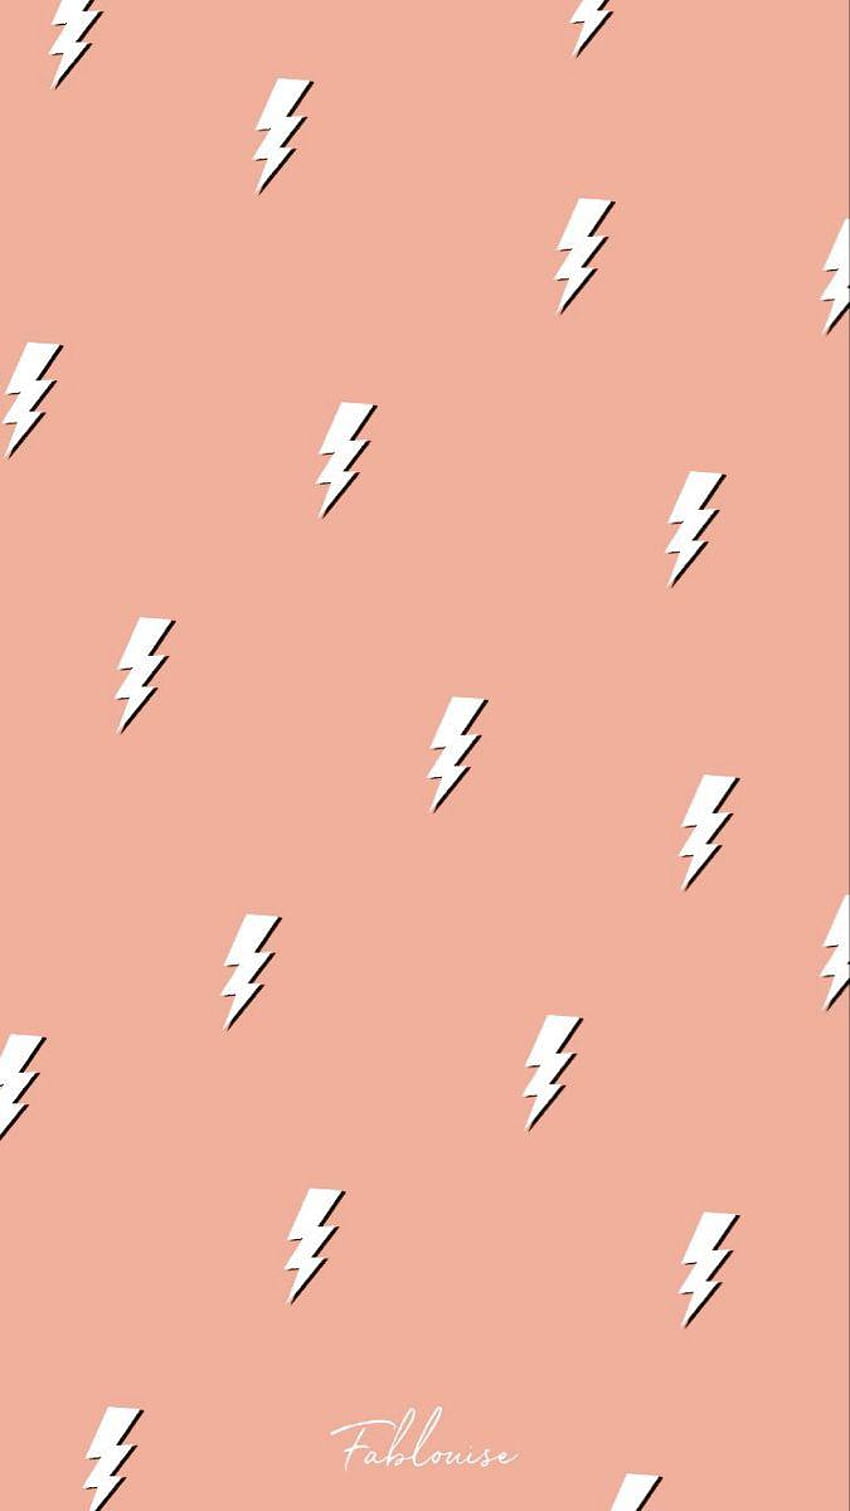 Peach lightning bolt wallpaper for your phone by Fakelouise - Preppy